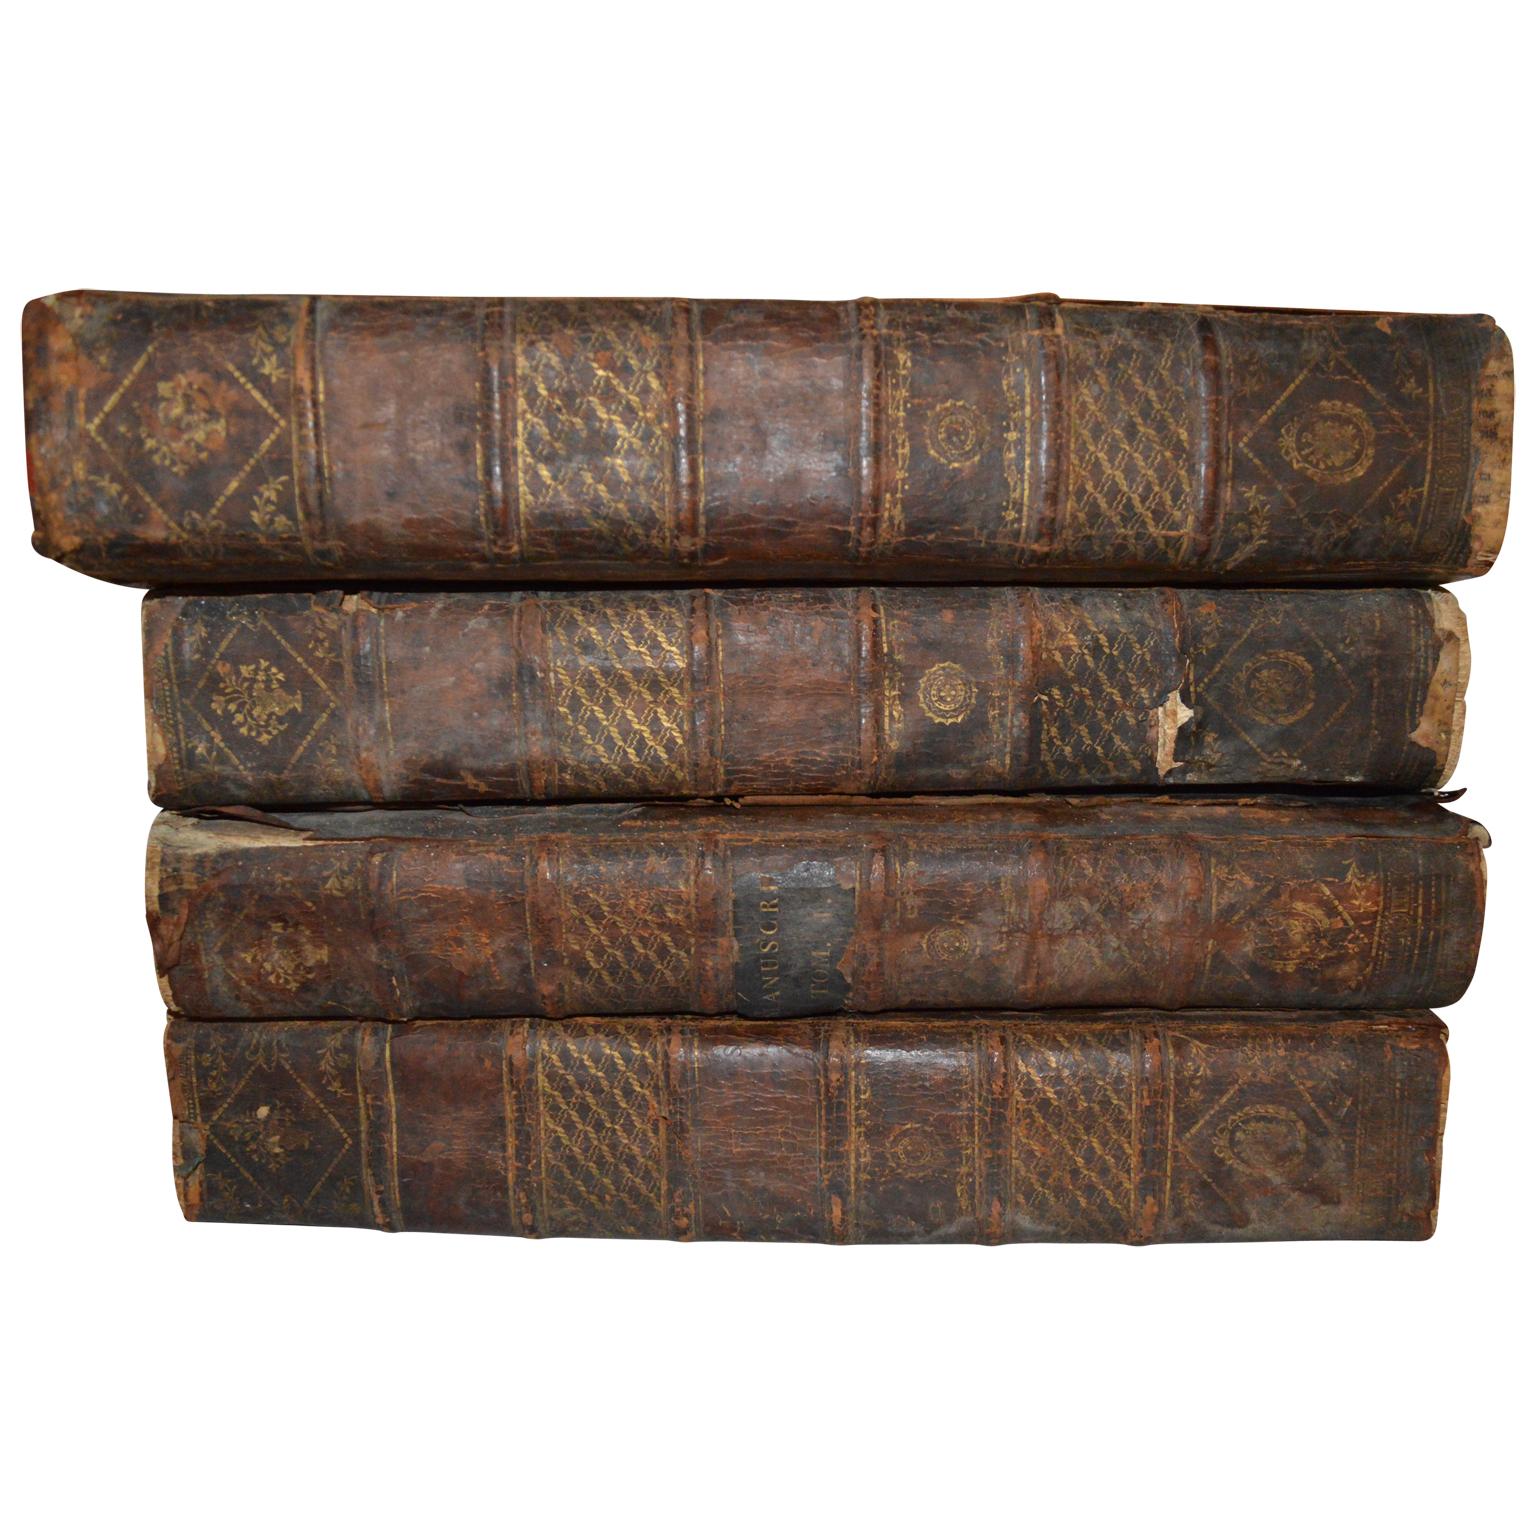 Set of Four Large Thick, 18th Century Leather-Bound Books for Decoration